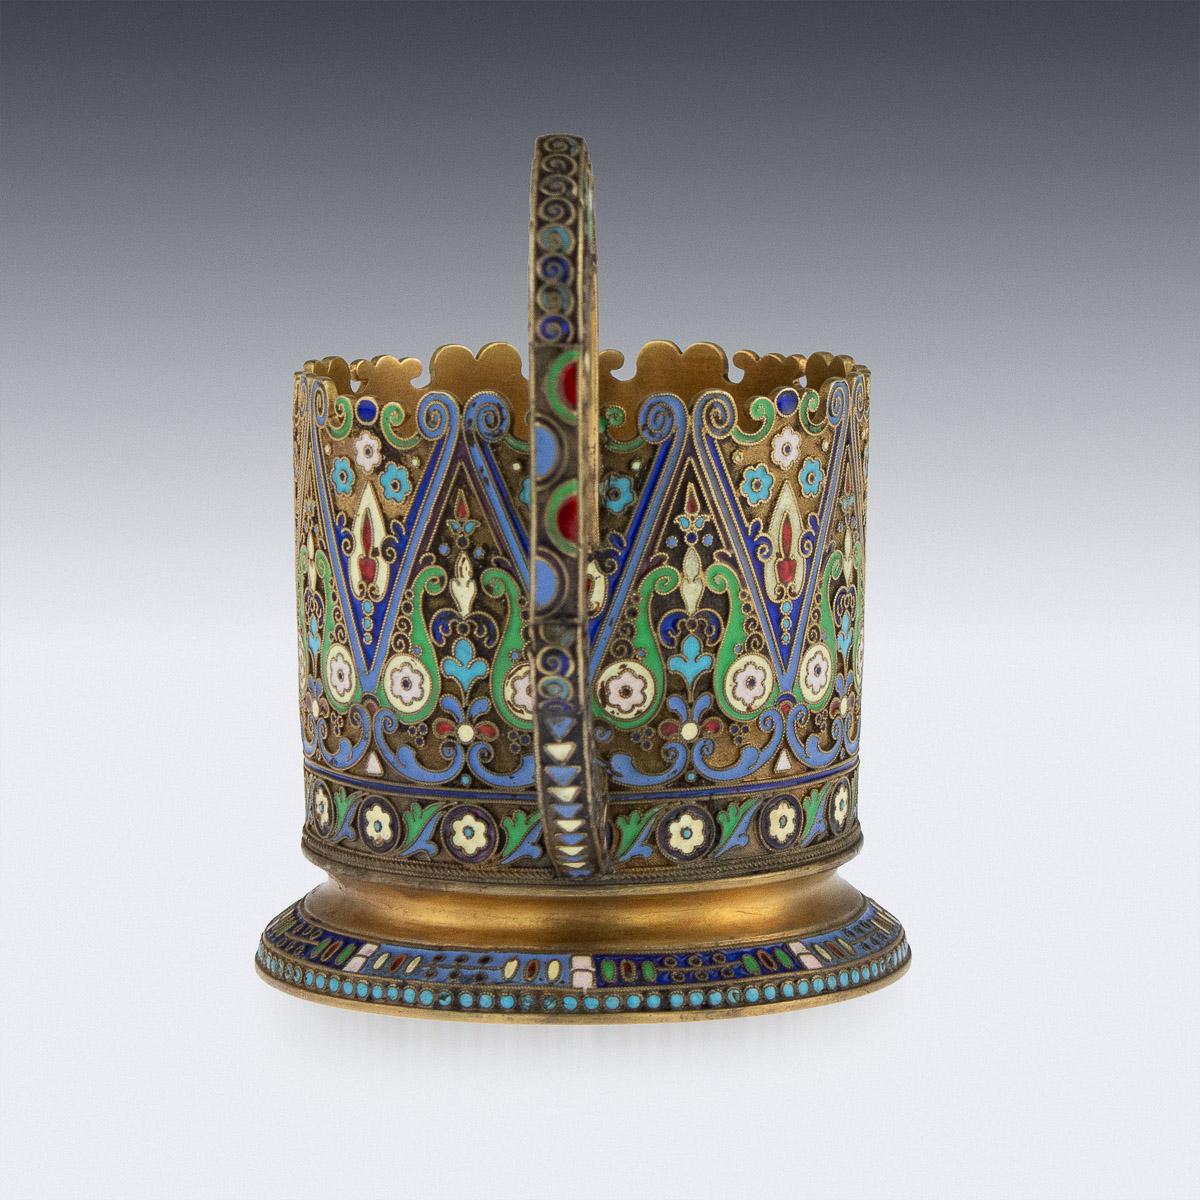 Antique early 20th century imperial Russian solid silver-gilt and cloisonné enamel tea glass holder, circular with upright scroll handle, shaped top rim and spreading foot, body profusely decorated with floral motifs in vary-colored cloisonné enamel